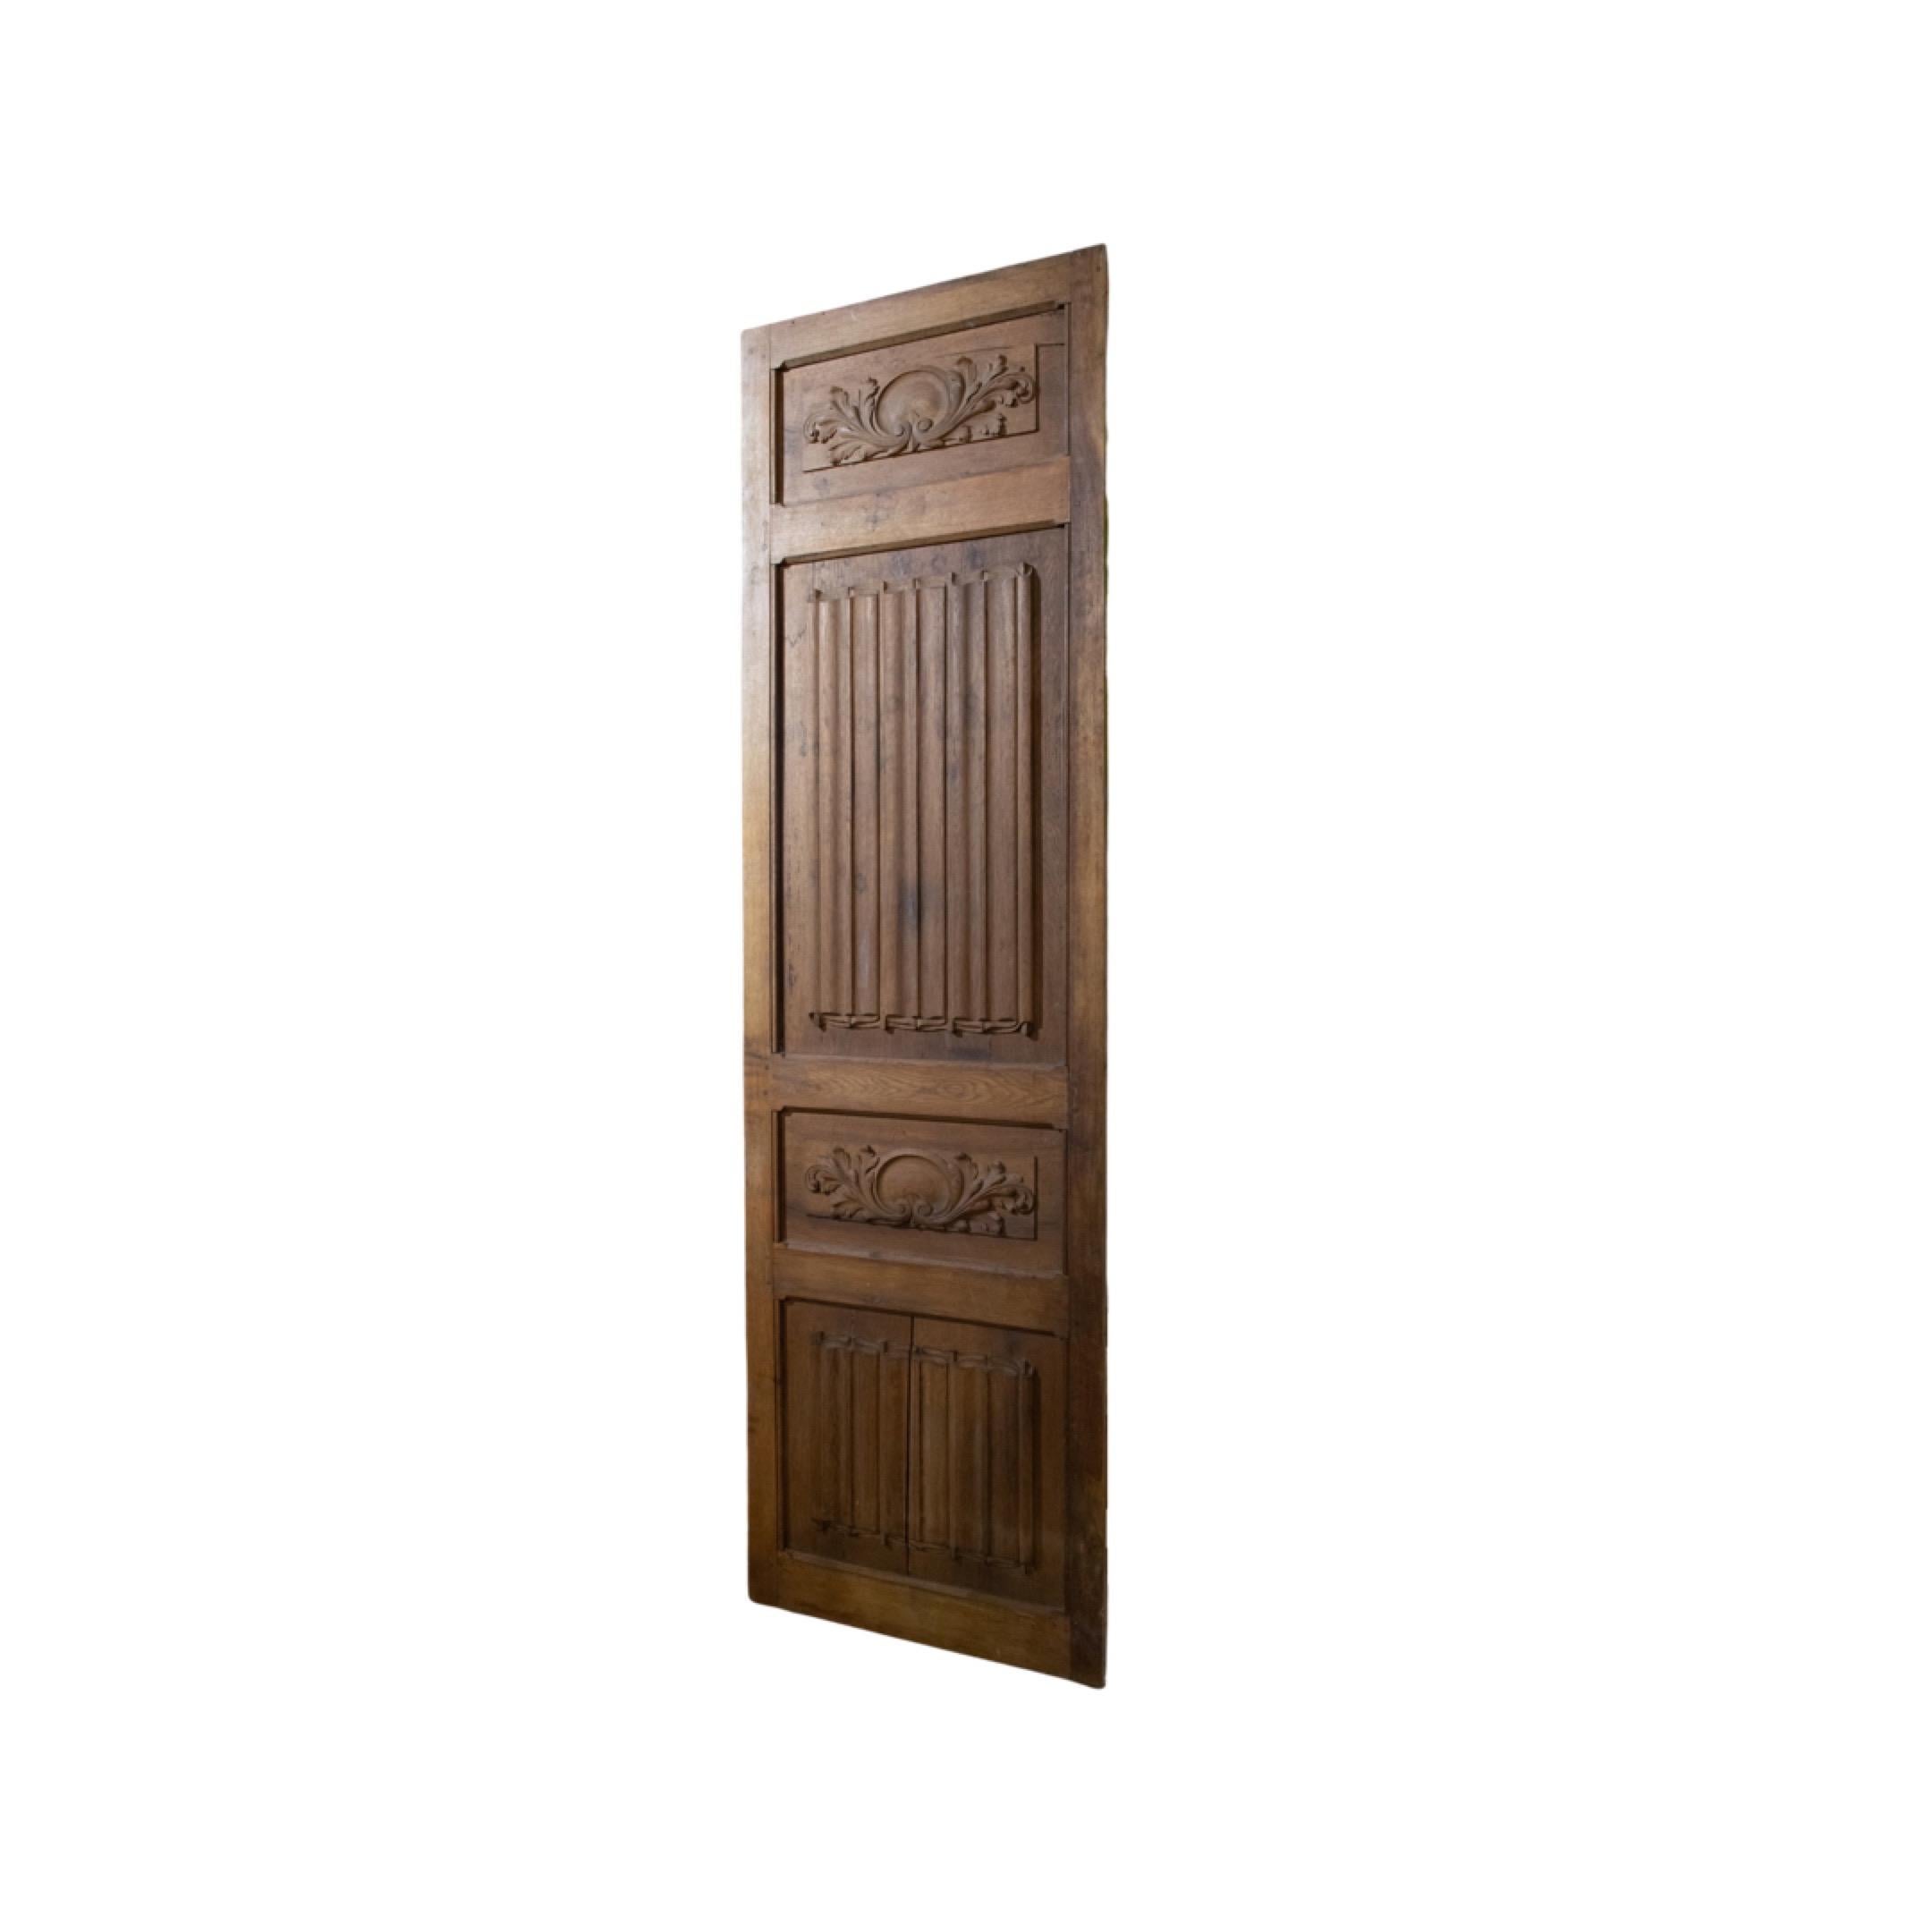 Pair of double doors. Made of Oak wood. Originates from France. Circa, 1880's. Sold as a pair.